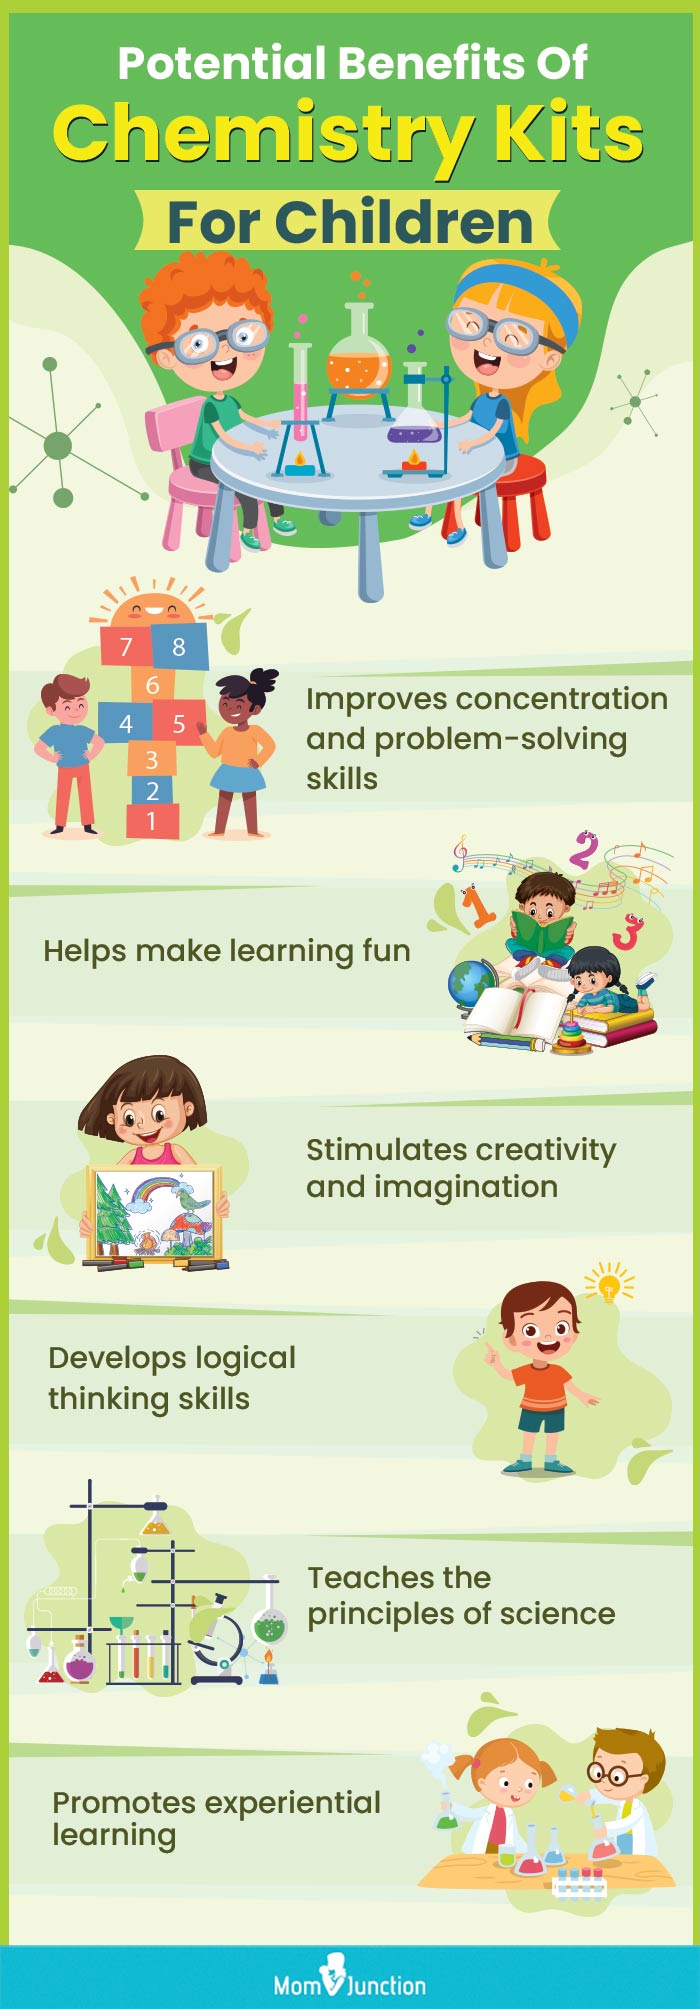 Potential Benefits Of Chemistry Kits For Children (infographic)